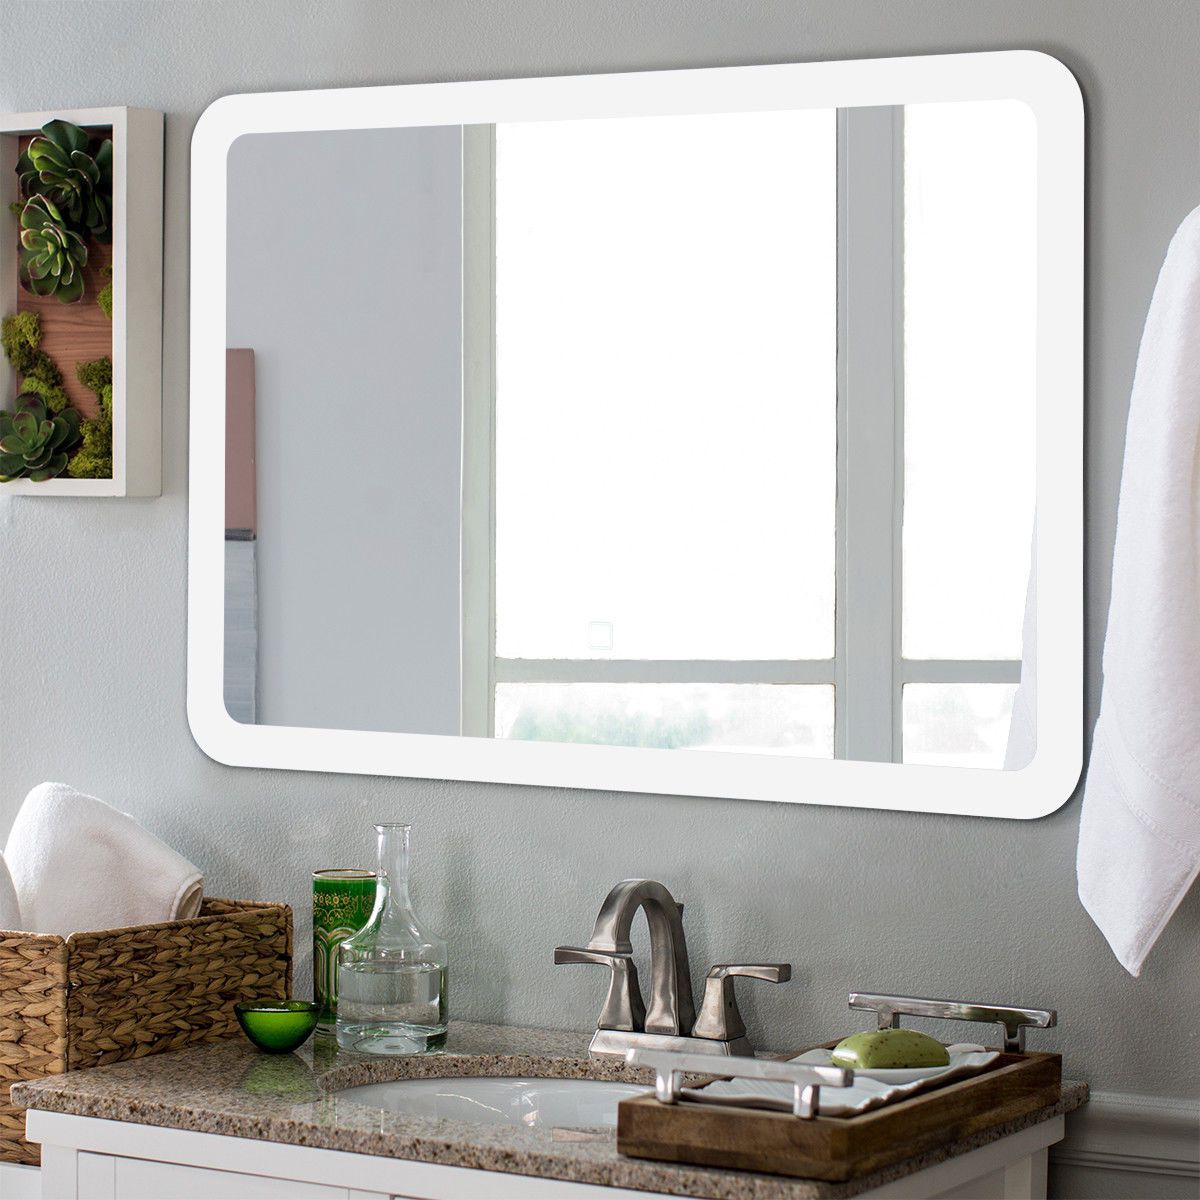 Costway Led Wall Mounted Mirror Bathroom Makeup Illuminated Rounded Arc Within Cut Corner Wall Mirrors (Photo 5 of 15)